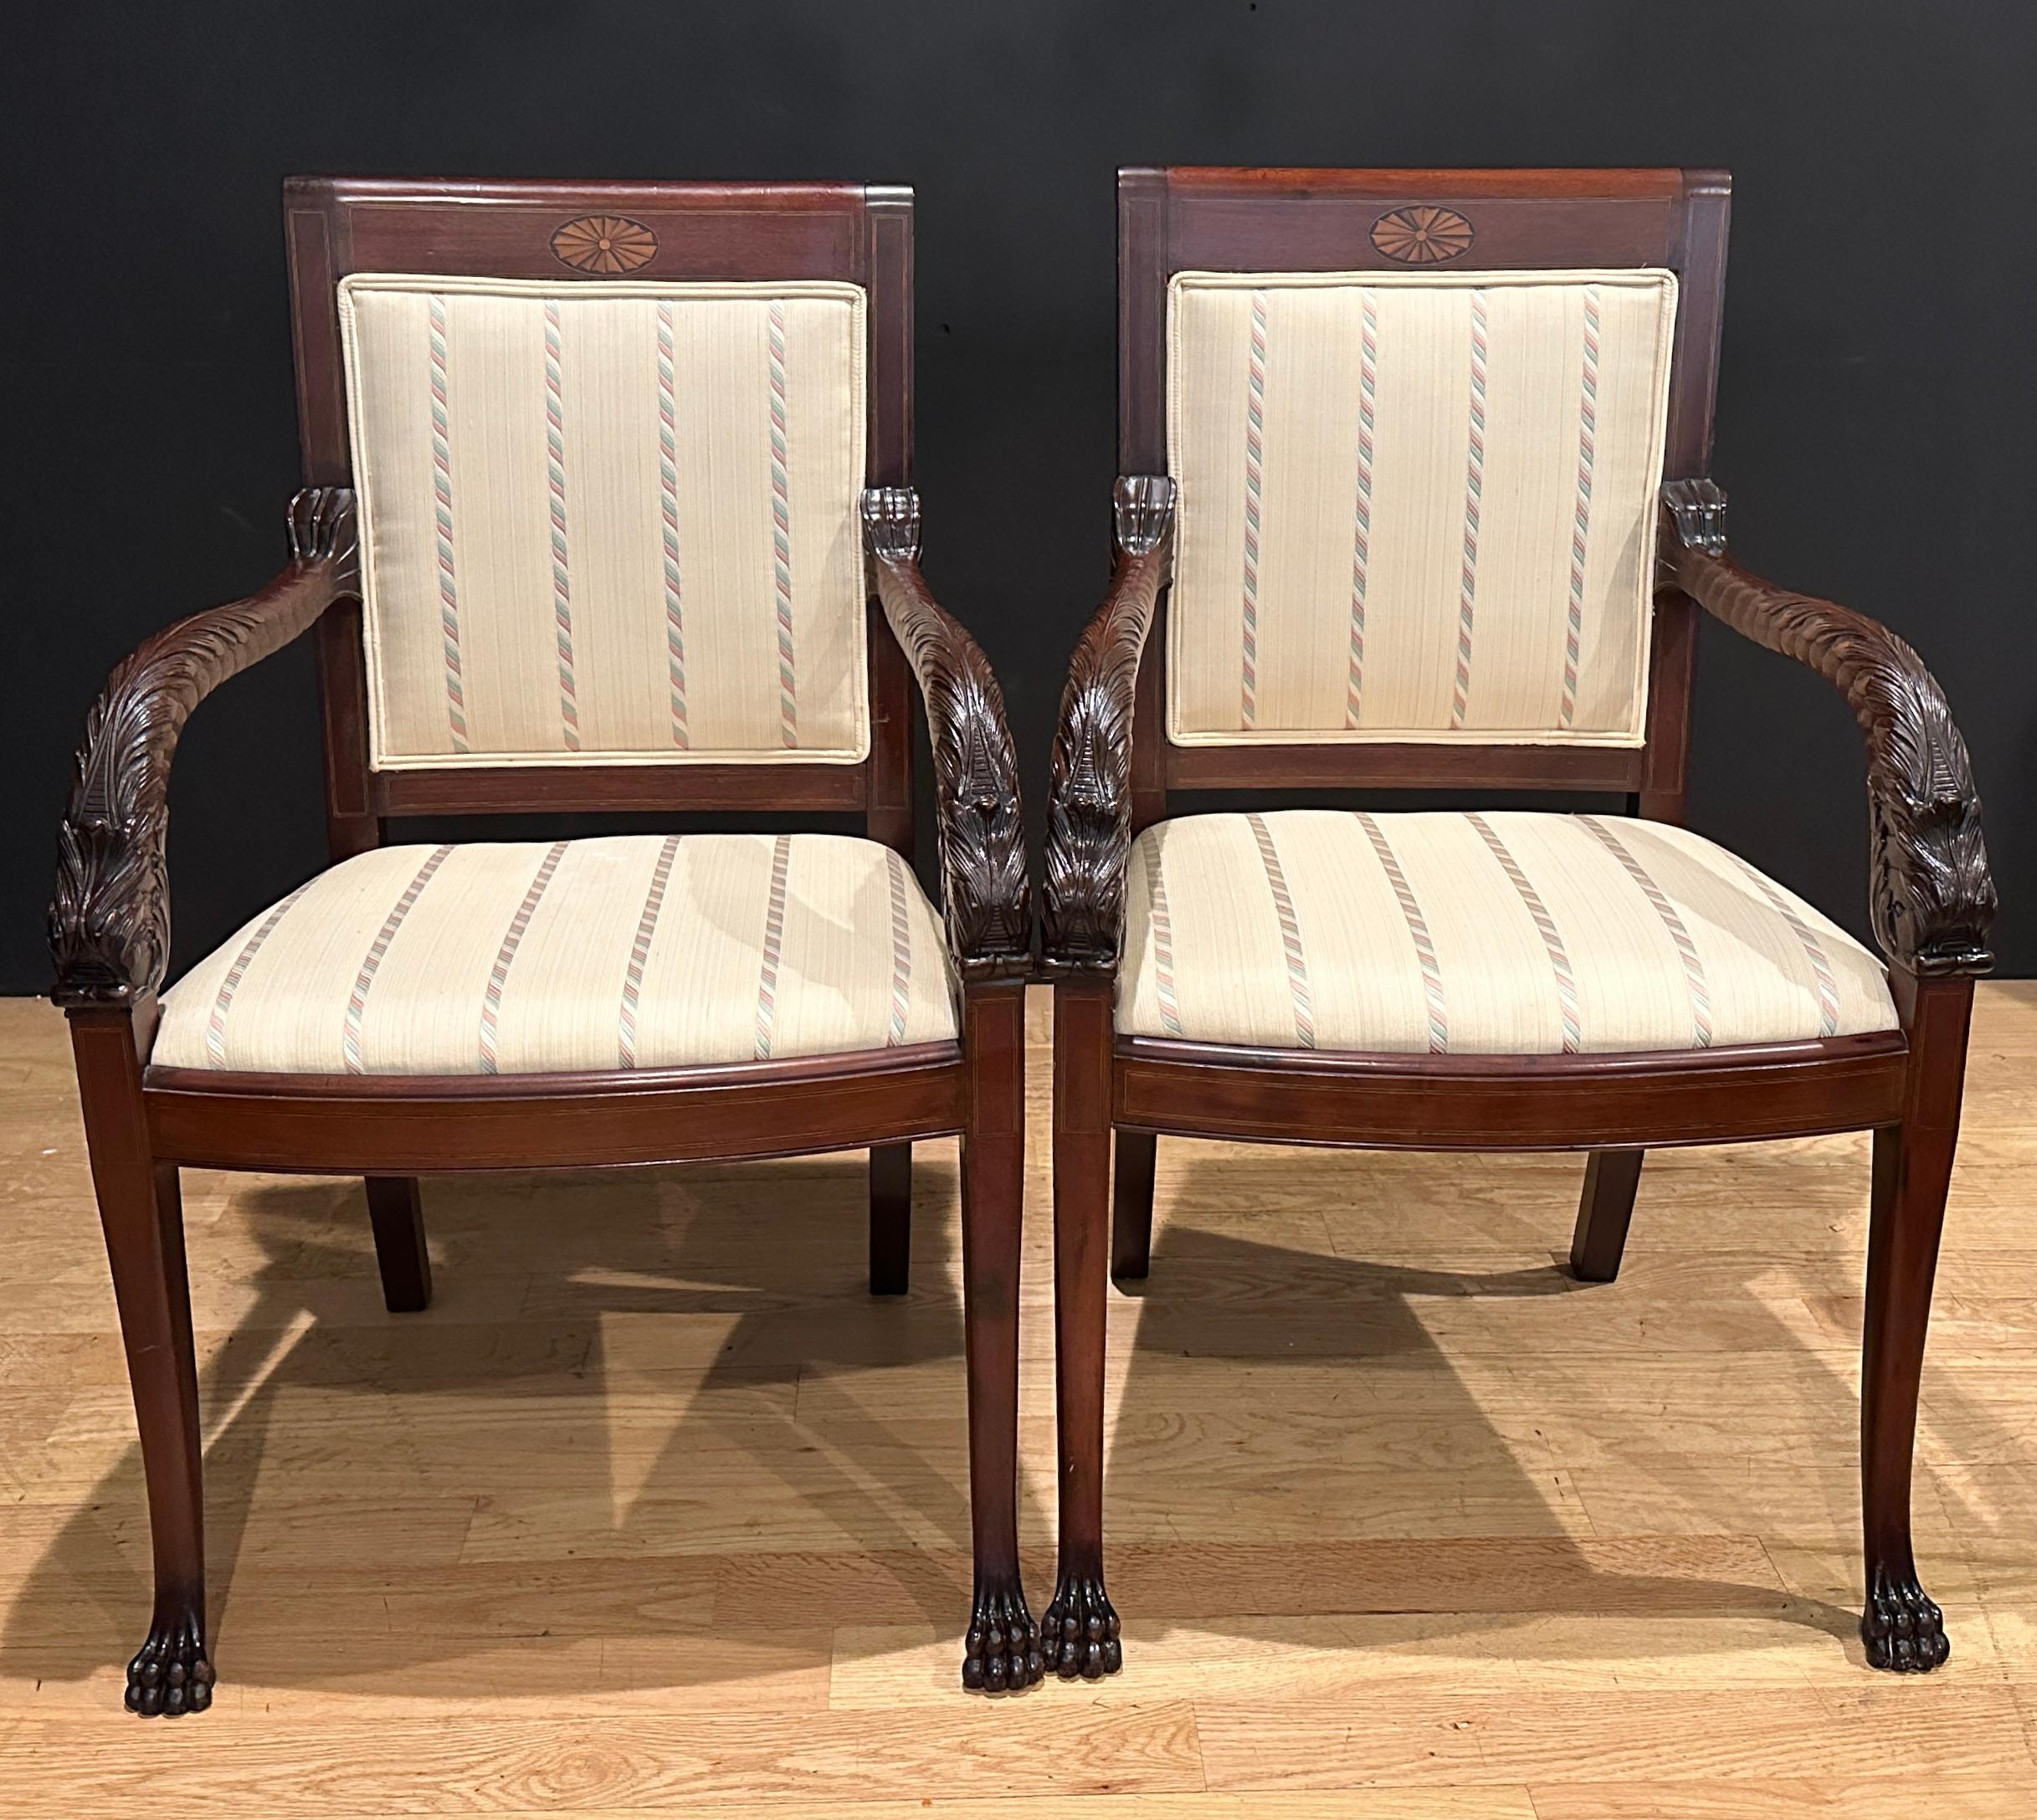 Pair of early 20th century hand carved mahogany armchairs with dolphin form arms. Fan design satinwood inlay on top rails. Square tapered legs with satinwood lay terminating in carved lion form feet.